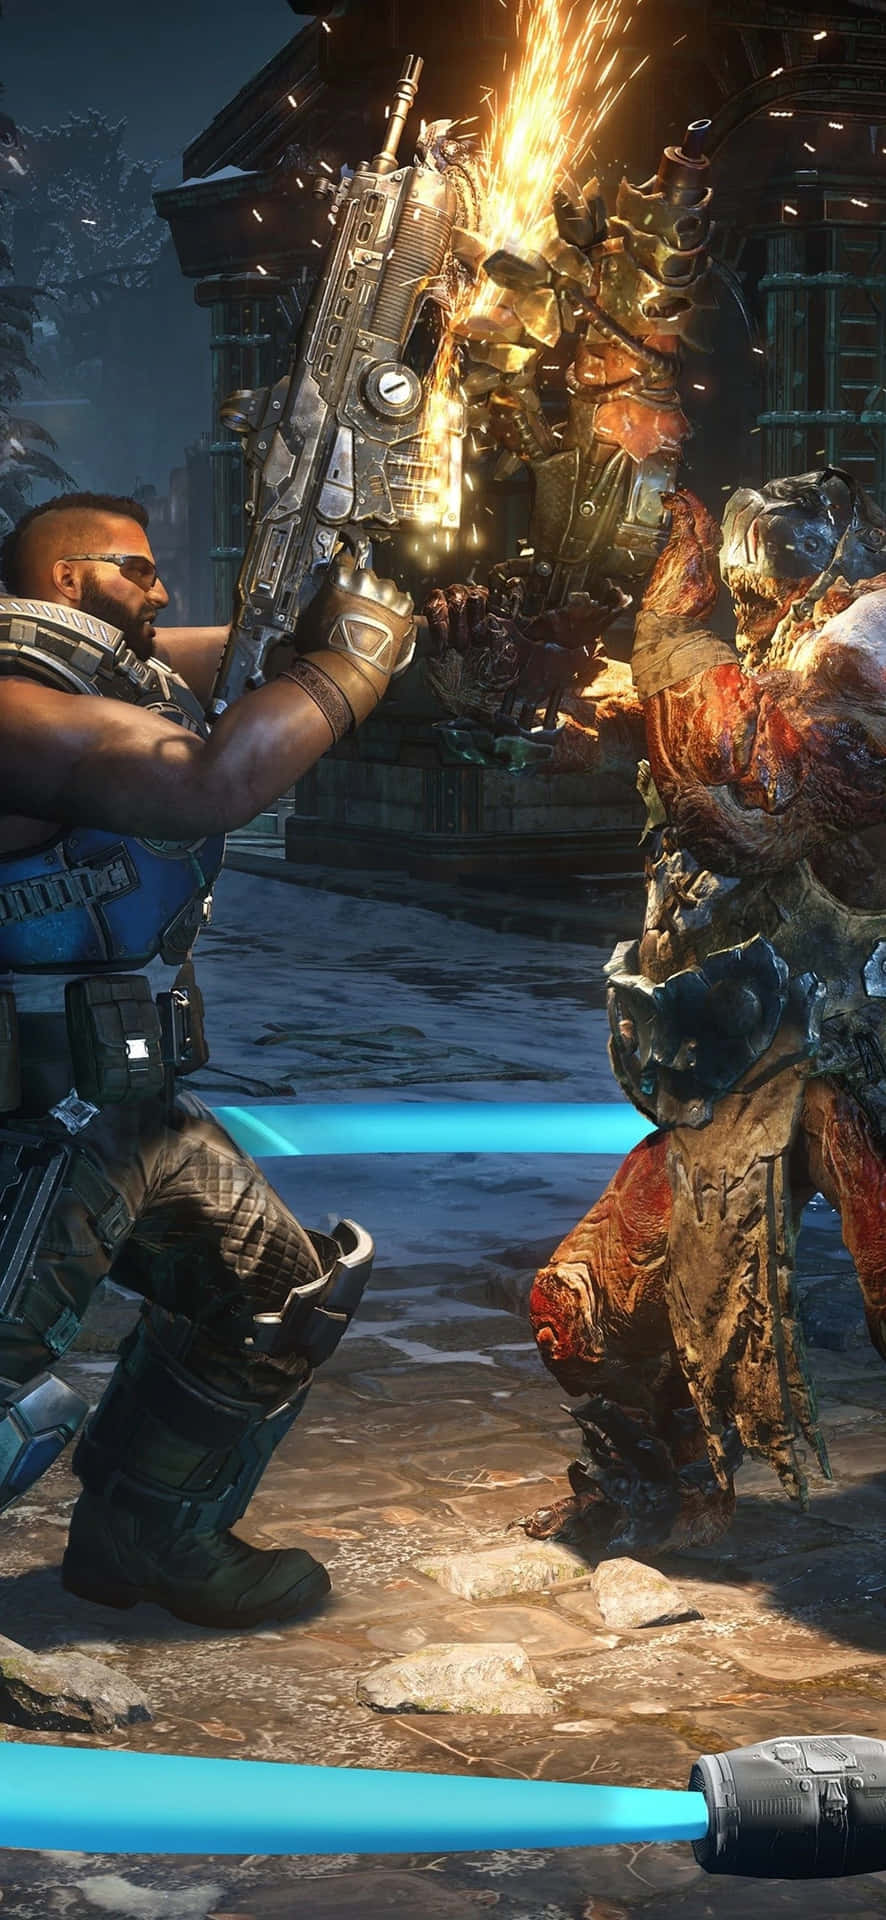 Prepáratepara Luchar: Android Gears Of War 5